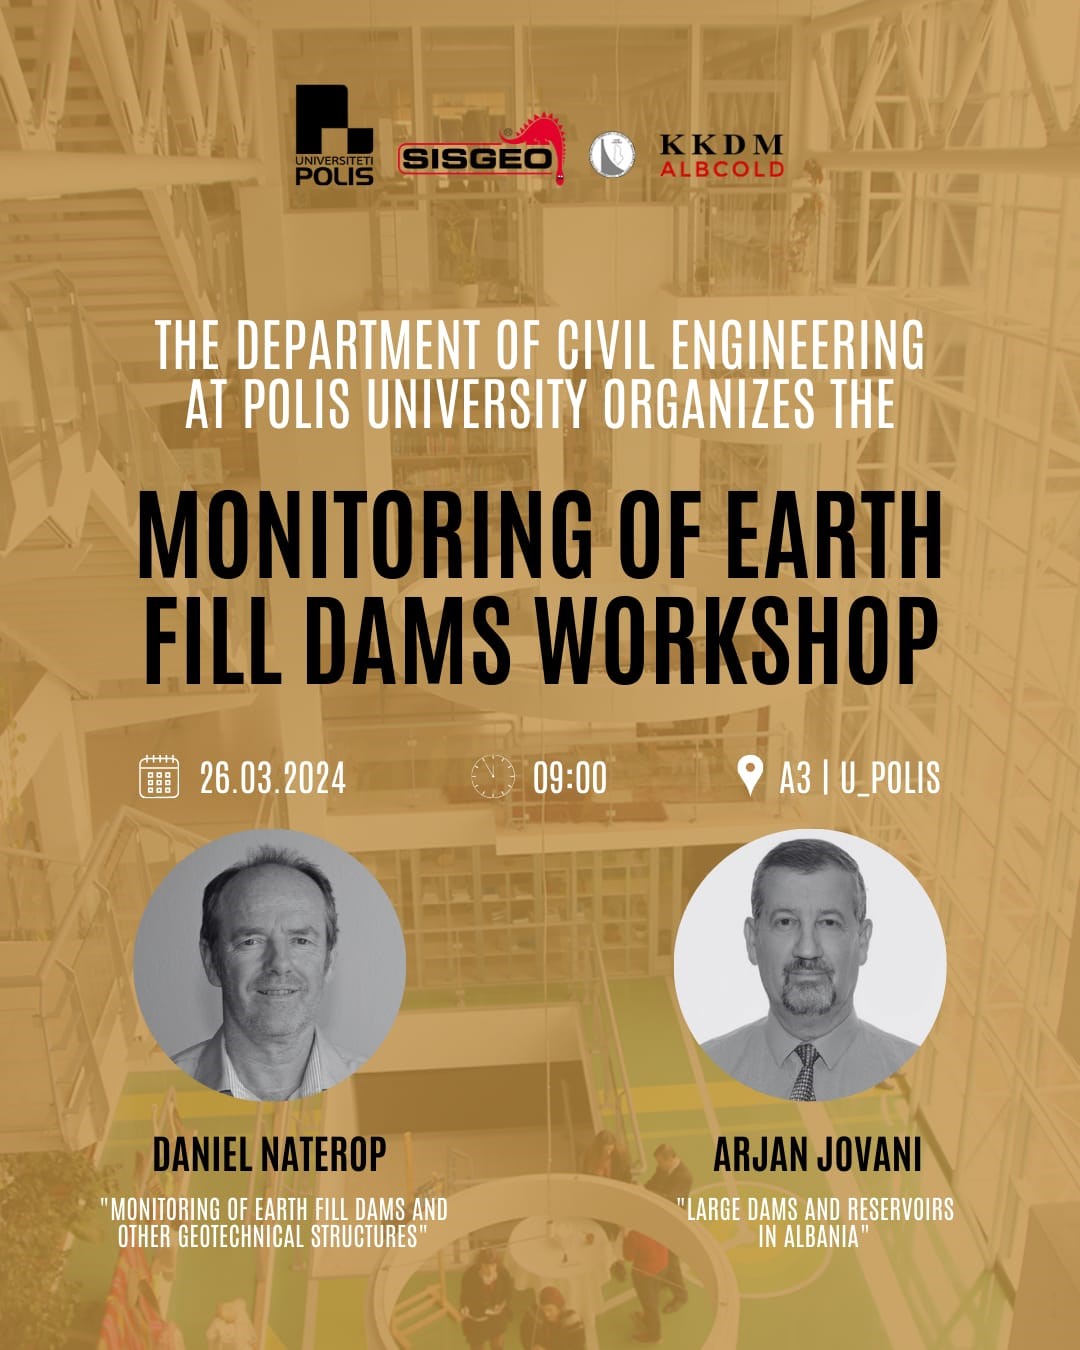 Workshop on Monitoring of Earthfill dams